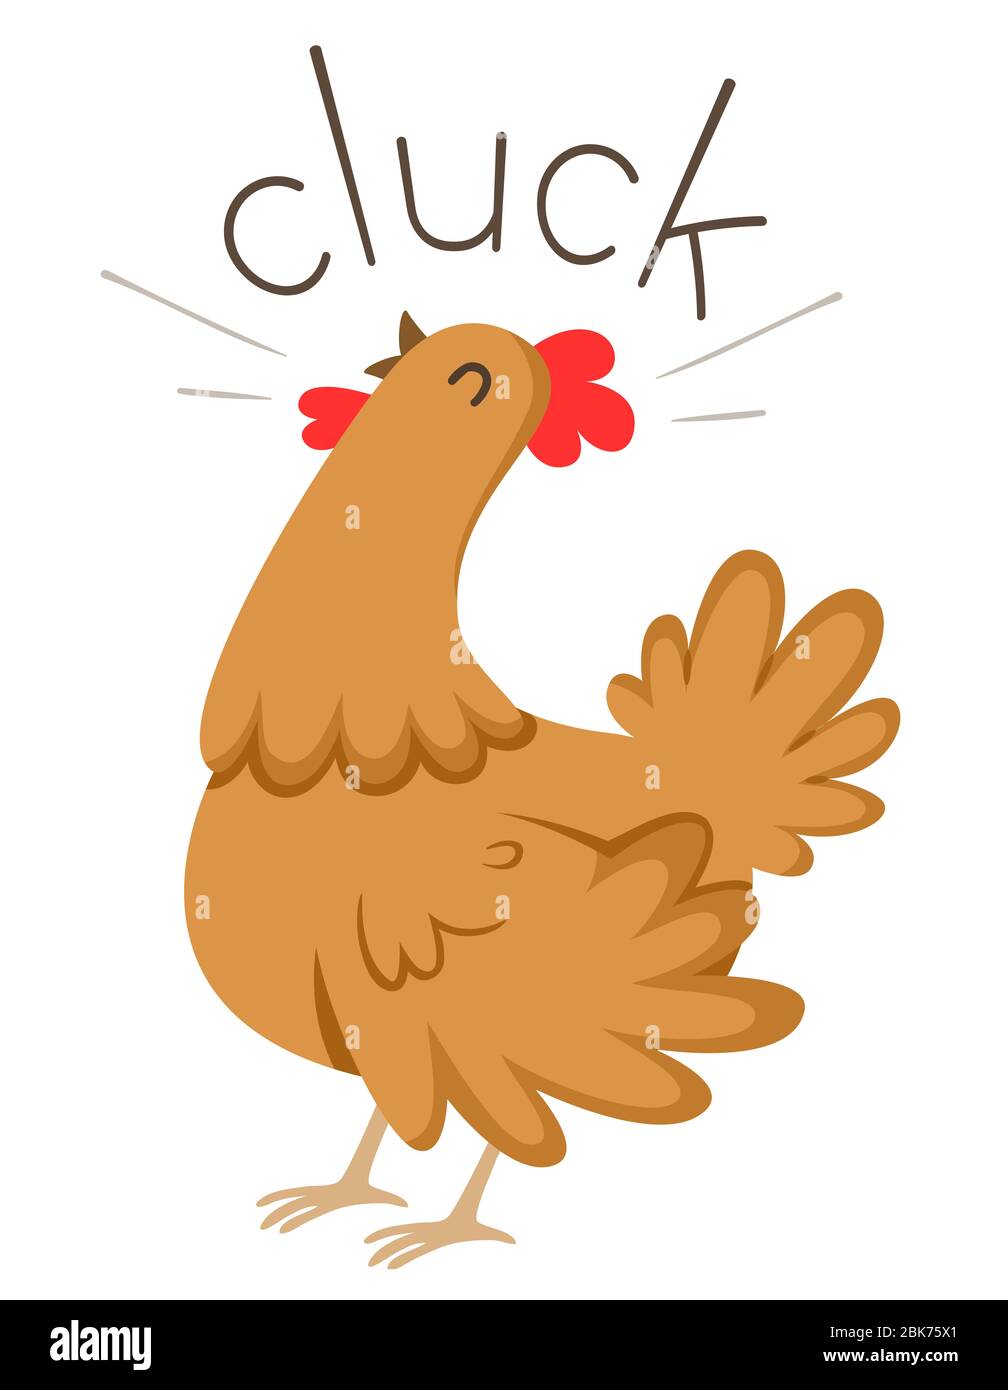 Illustration of a Hen Making a Cluck Sound Stock Photo